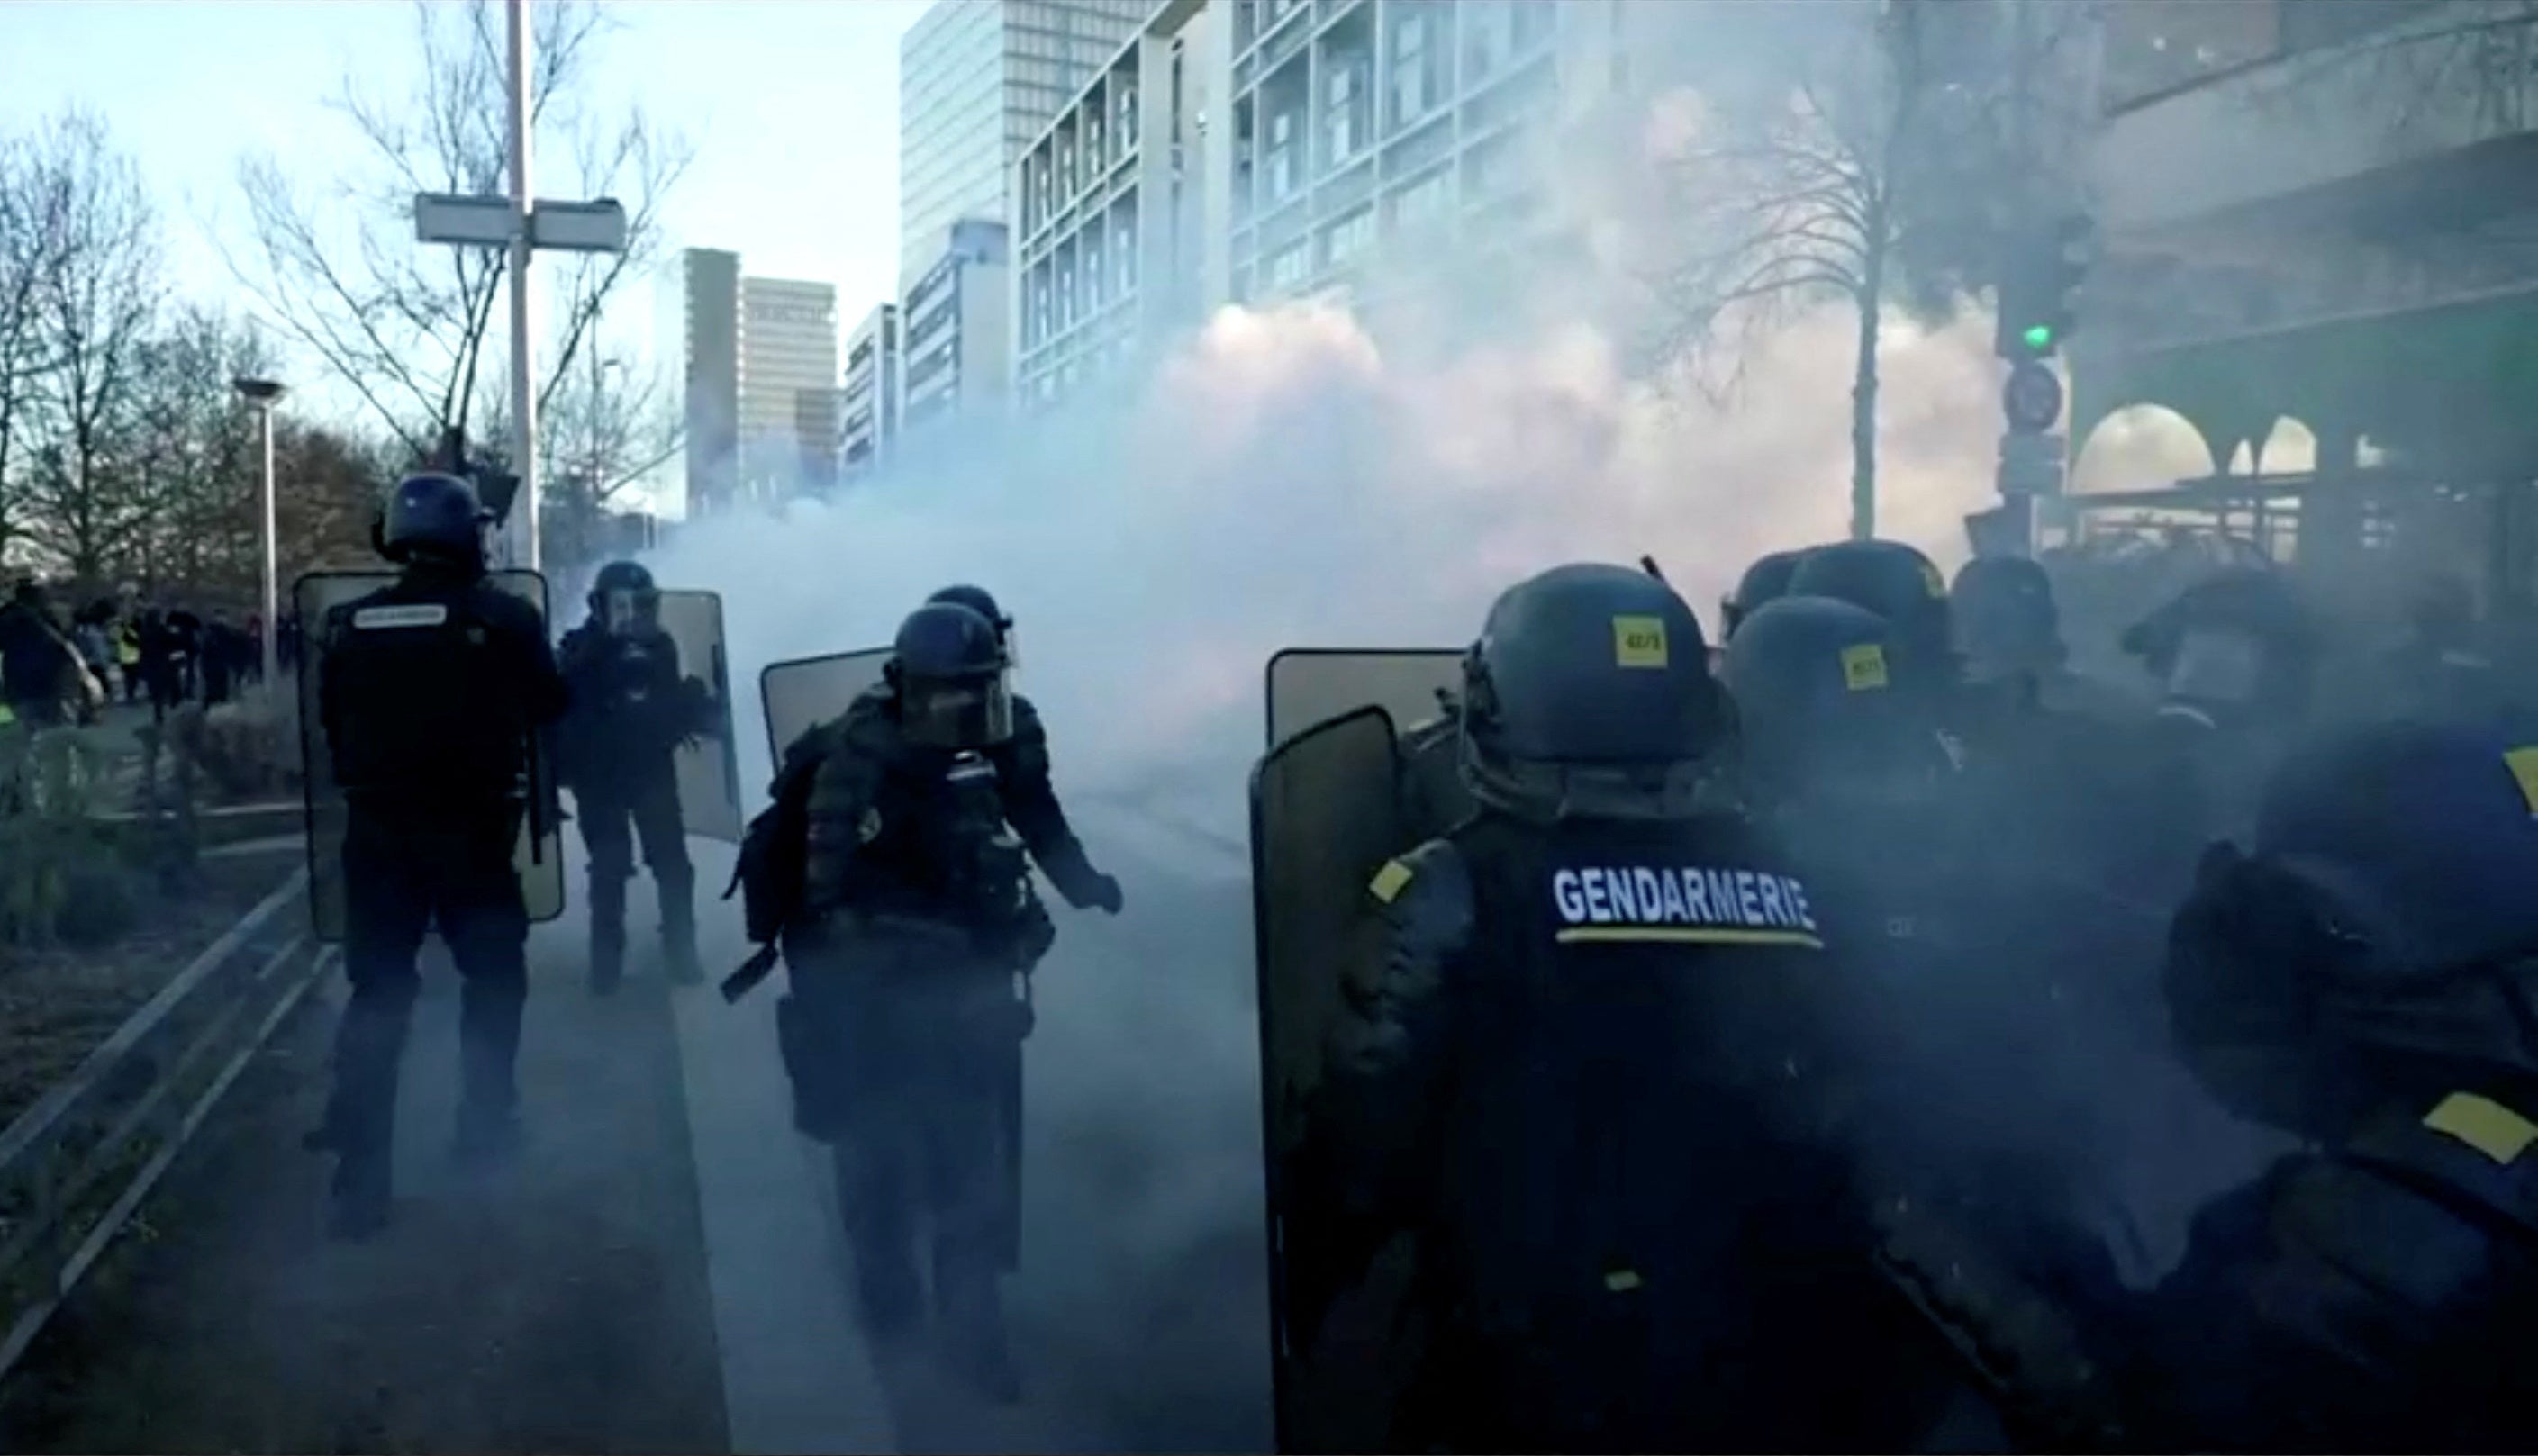 French police use tear gas while facing demonstrators